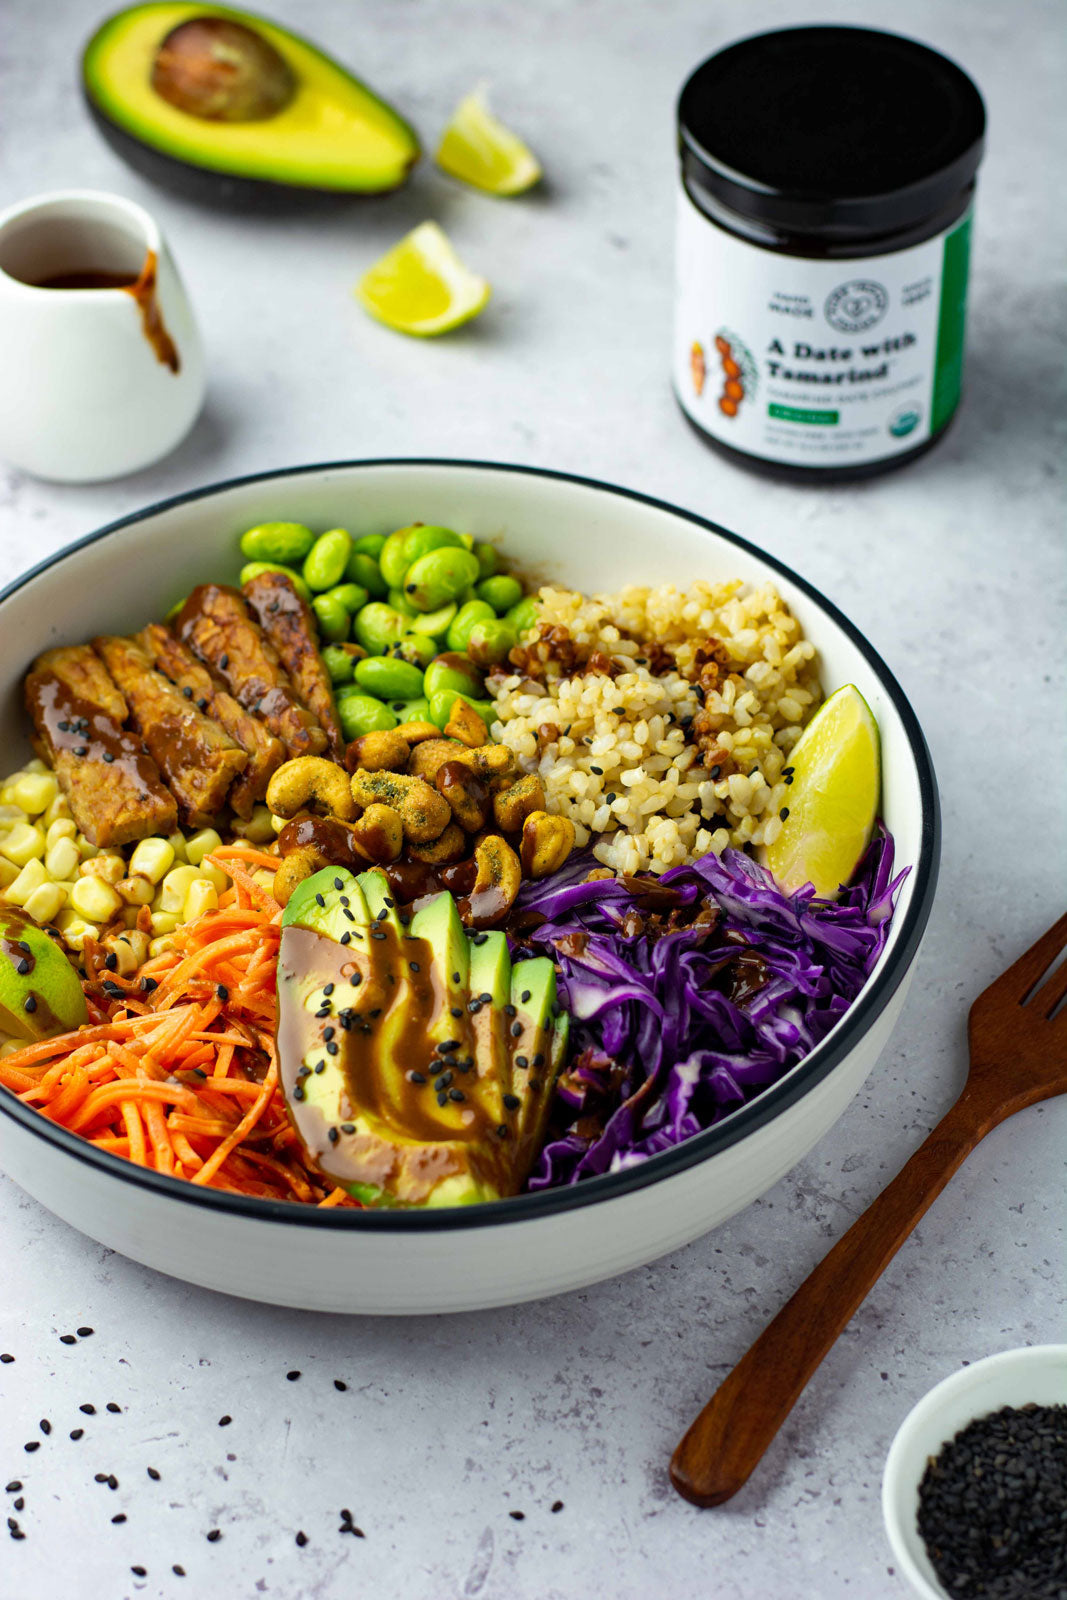 A vegetarian tempeh rice bowl drizzled with the tamarind chutney from Pure Indian Foods.